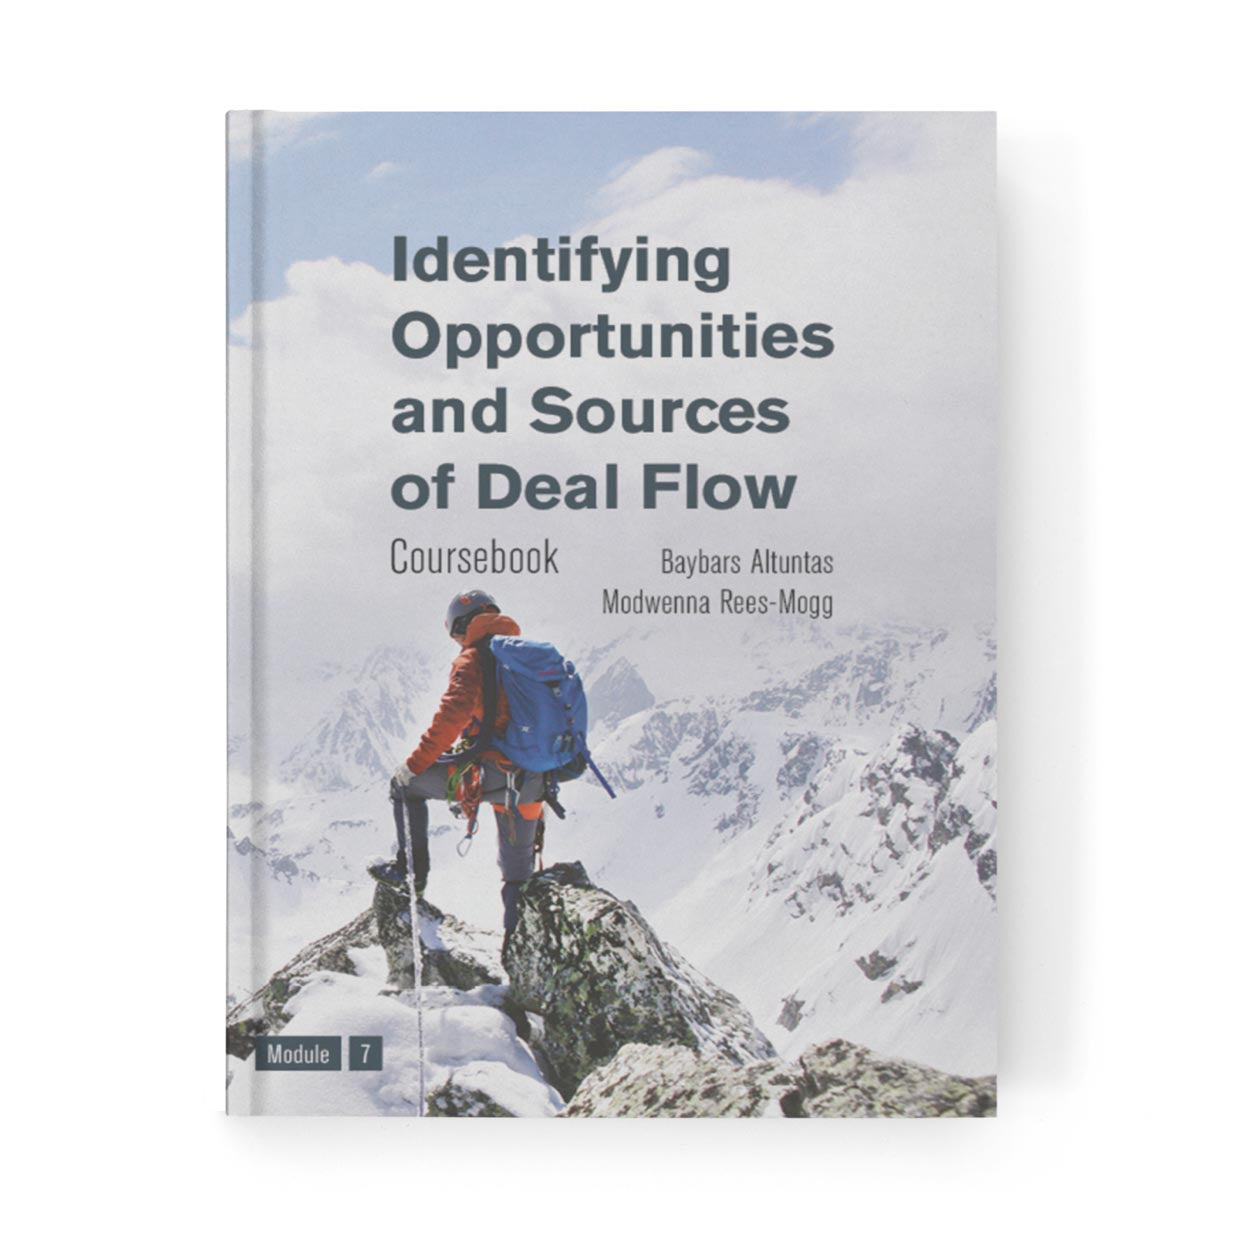 Identifying Opportunities and Sources of Deal Flow Coursebook